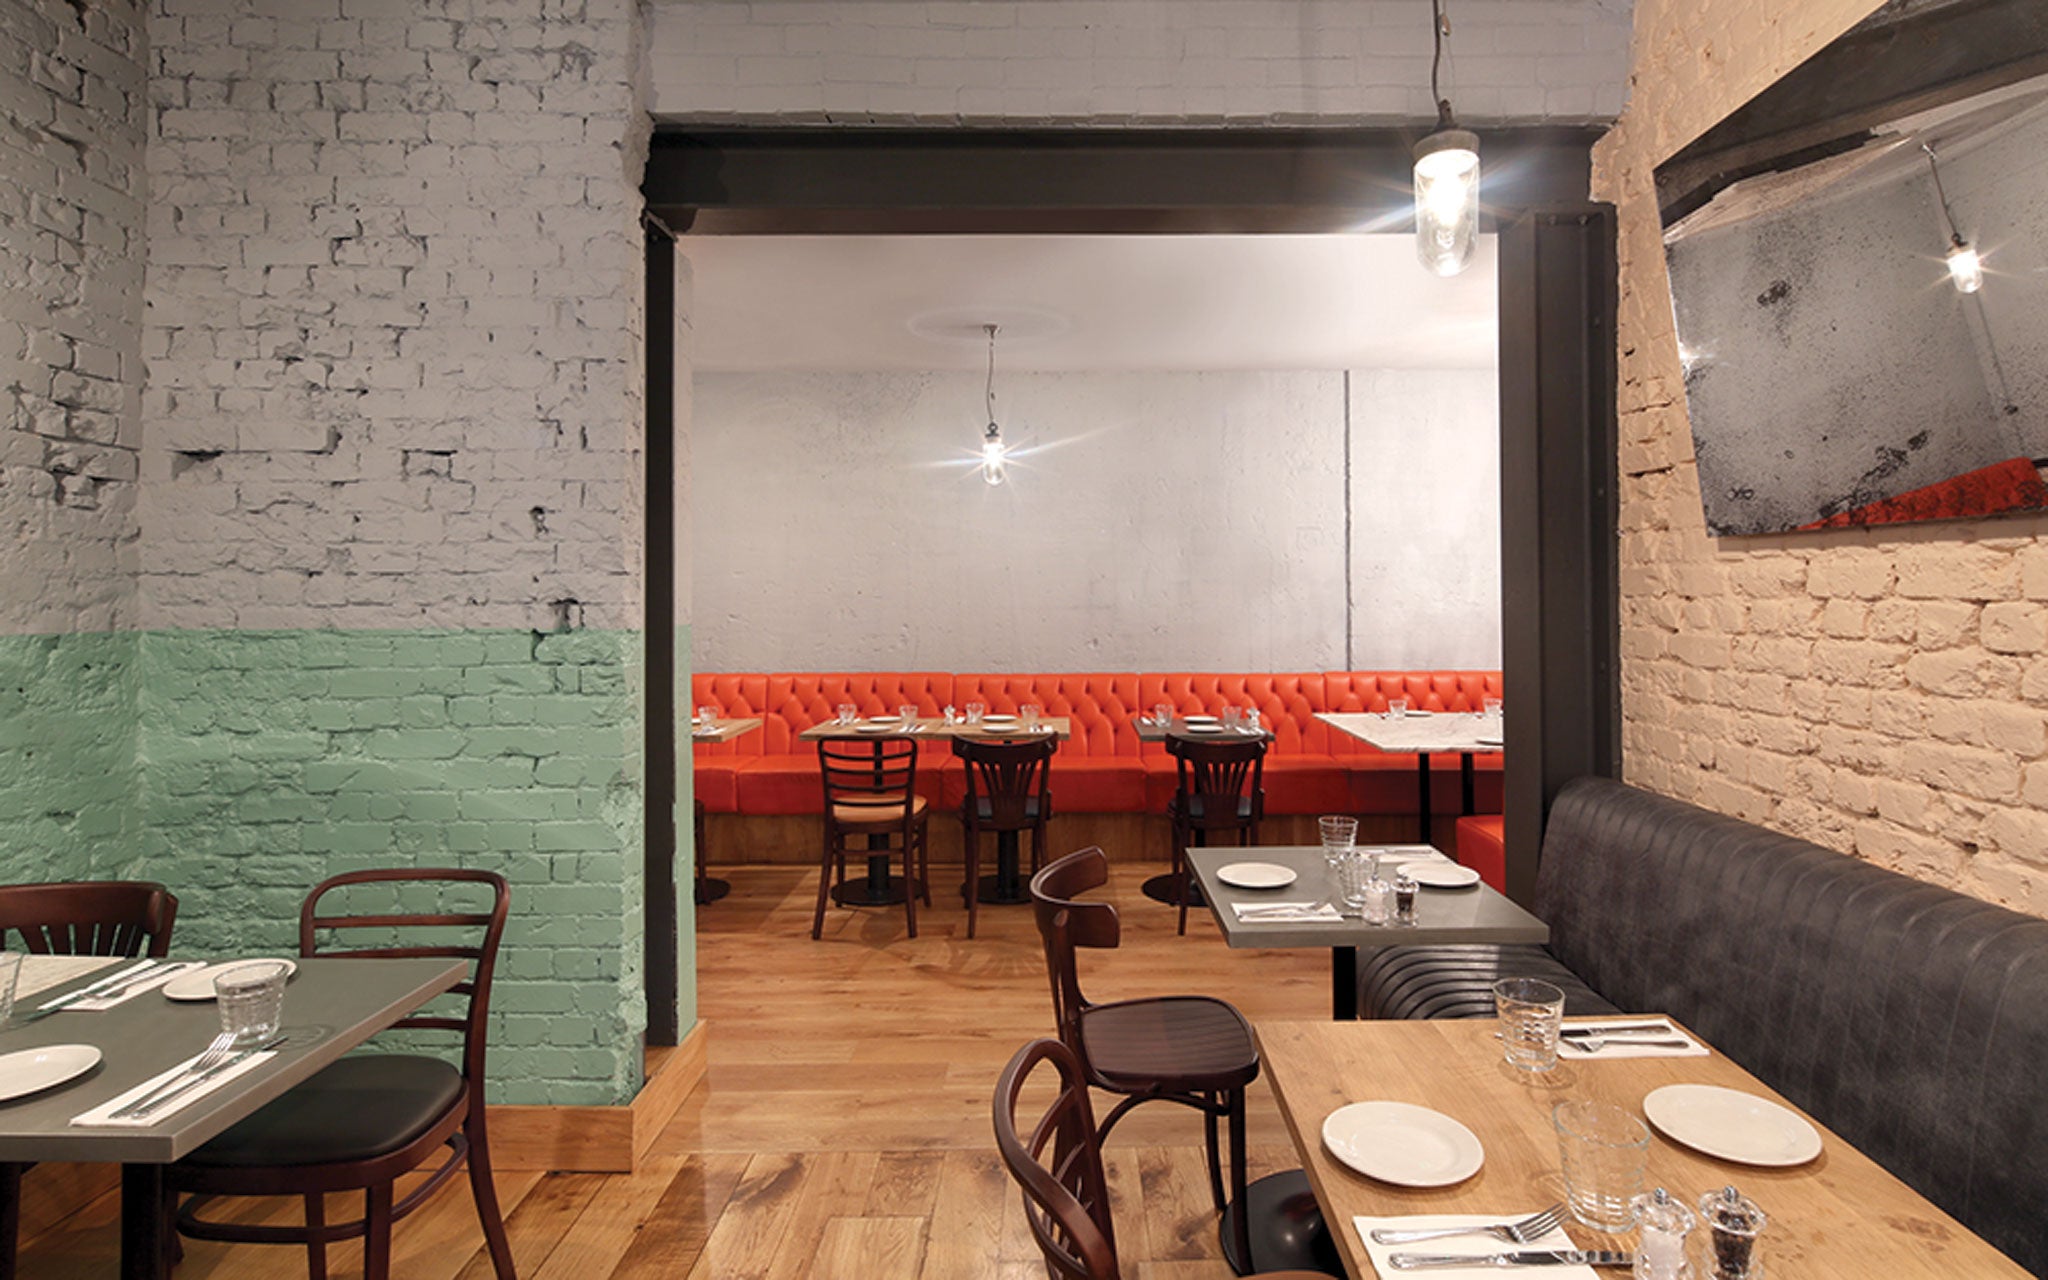 Café Pistou is a likeable joint, with whitewashed walls and French-bistro detailing everywhere